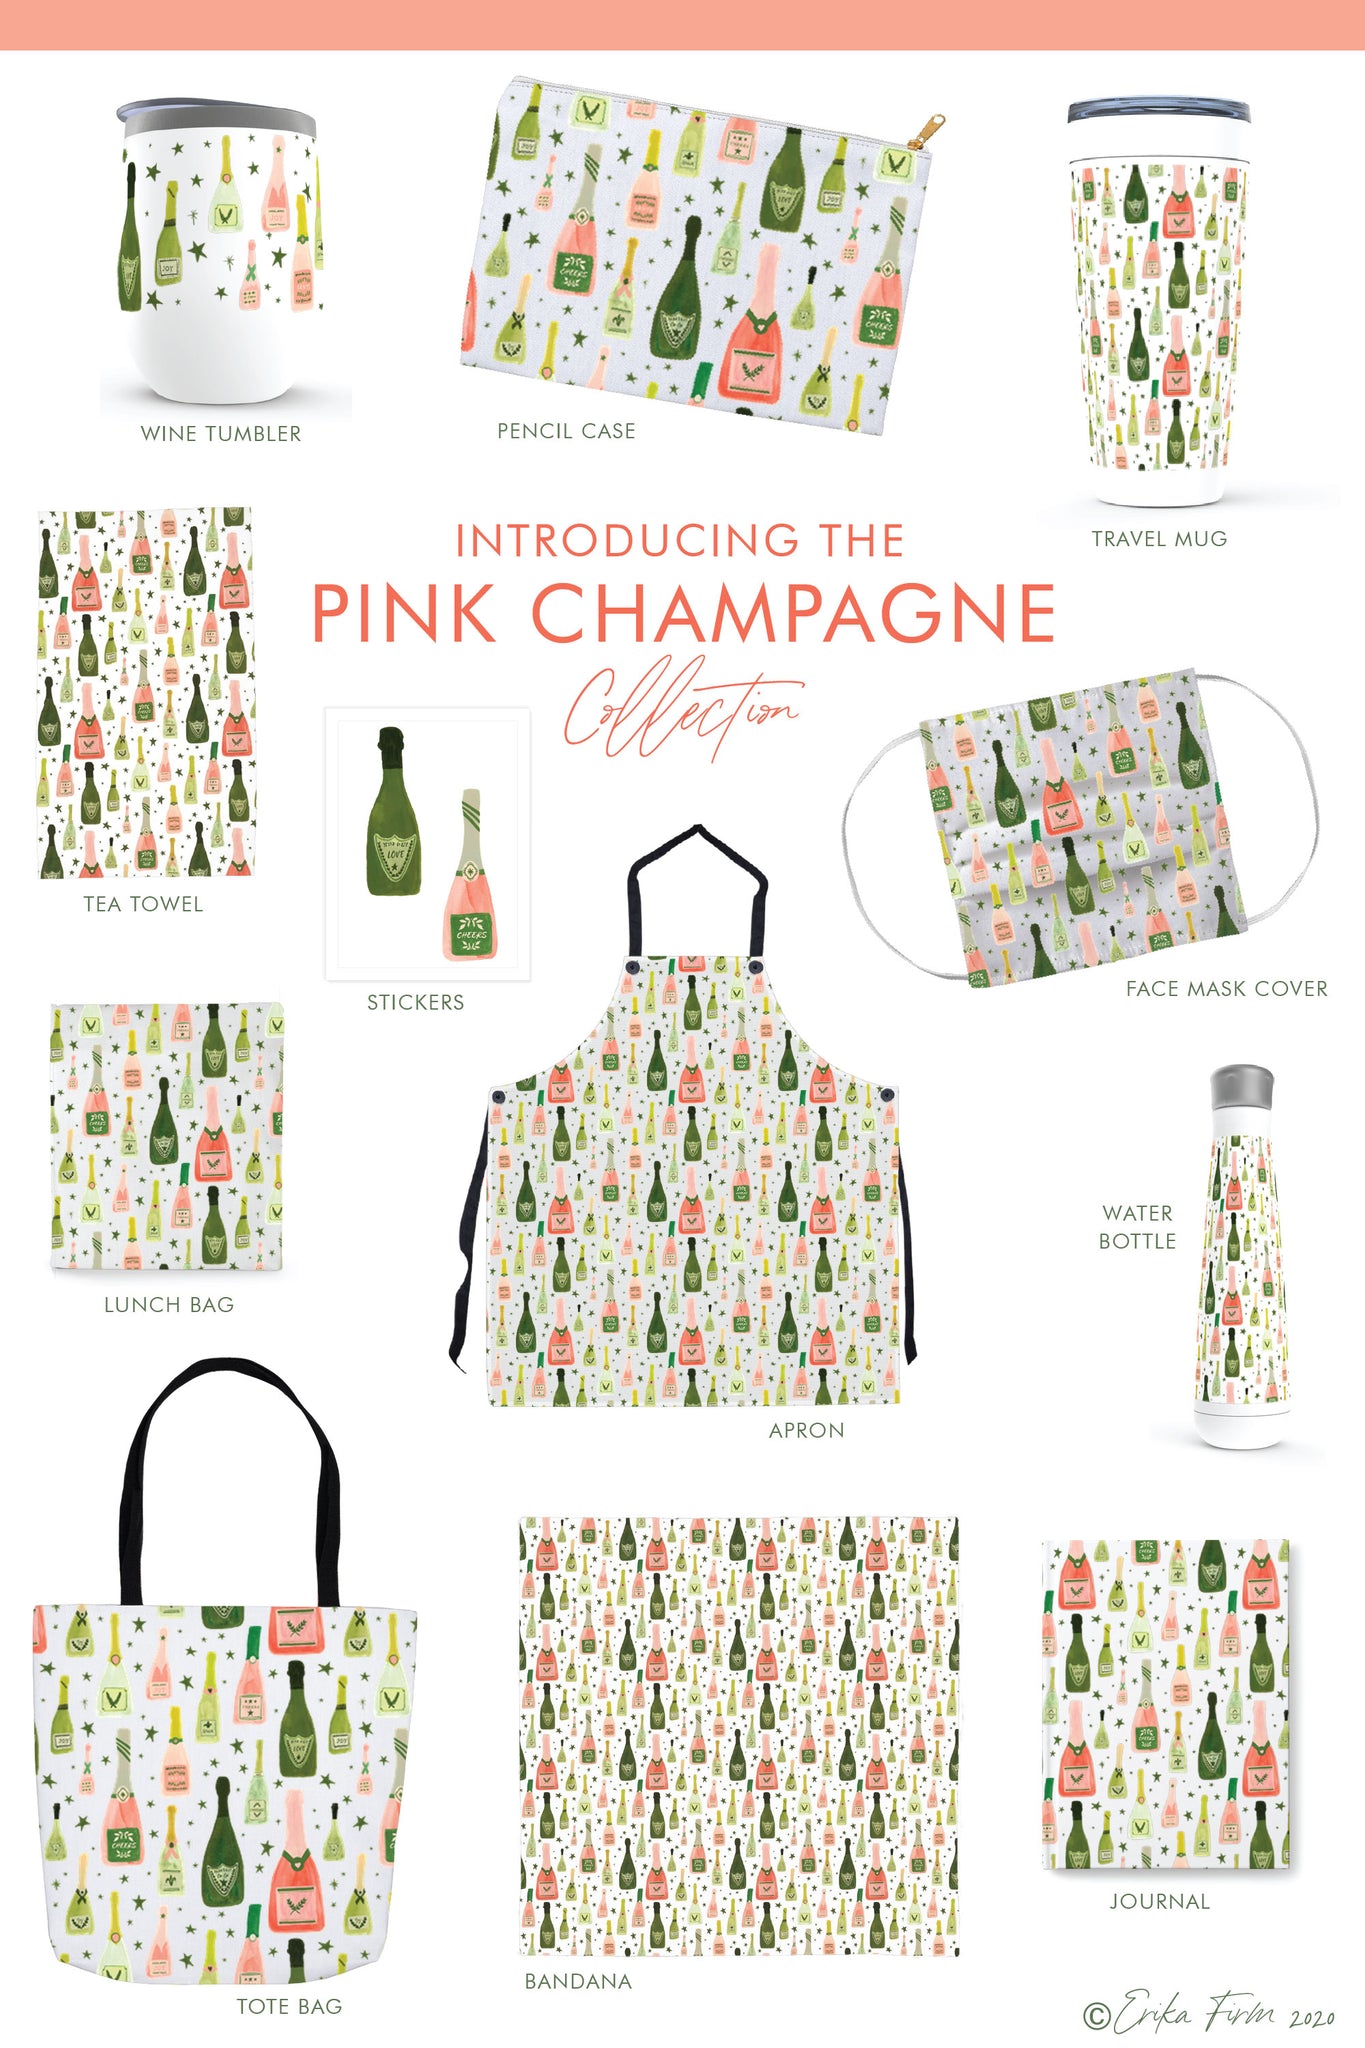 New Pink Champagne Collection by Erika firm